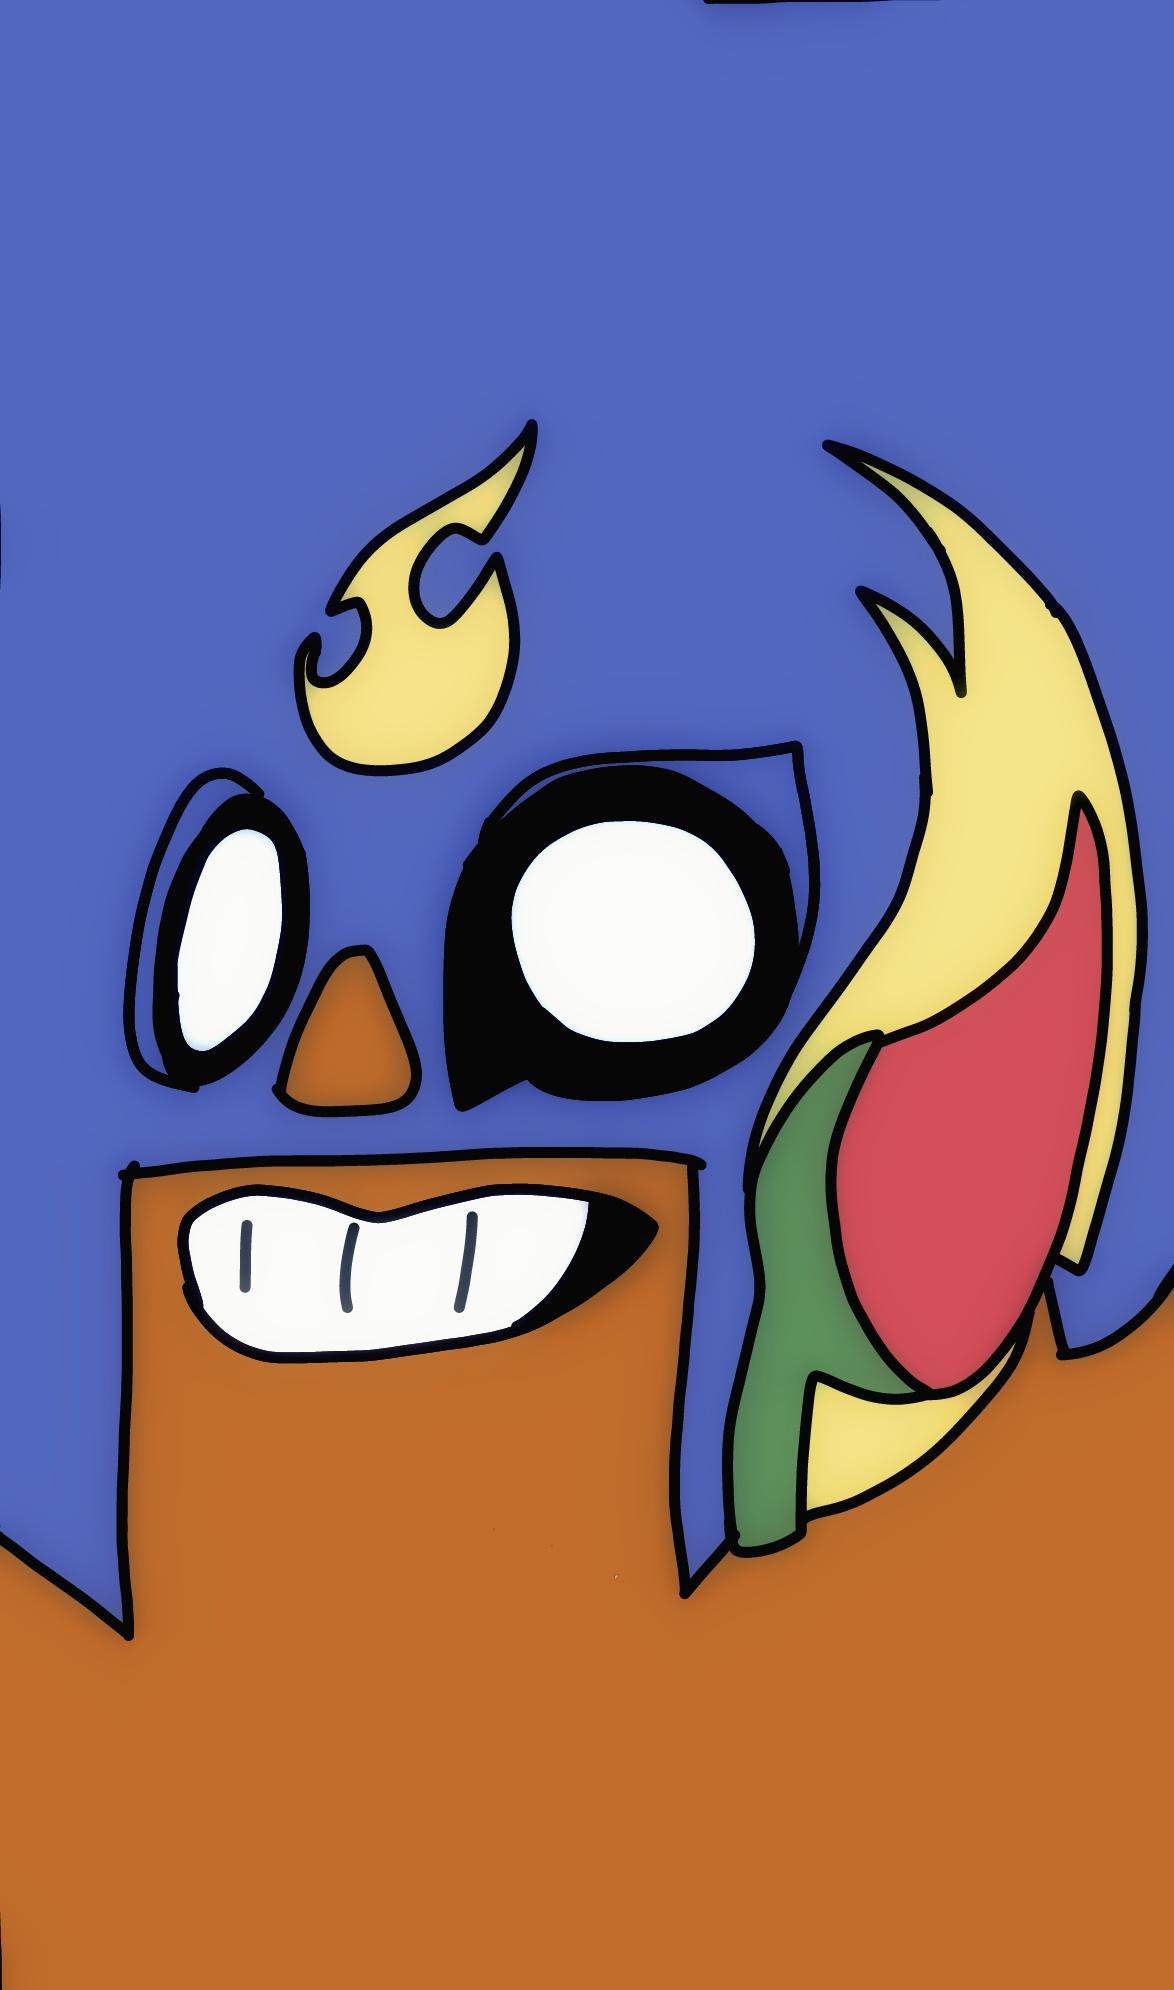 El Primo phone wallpaper! Please rate it so I can draw more